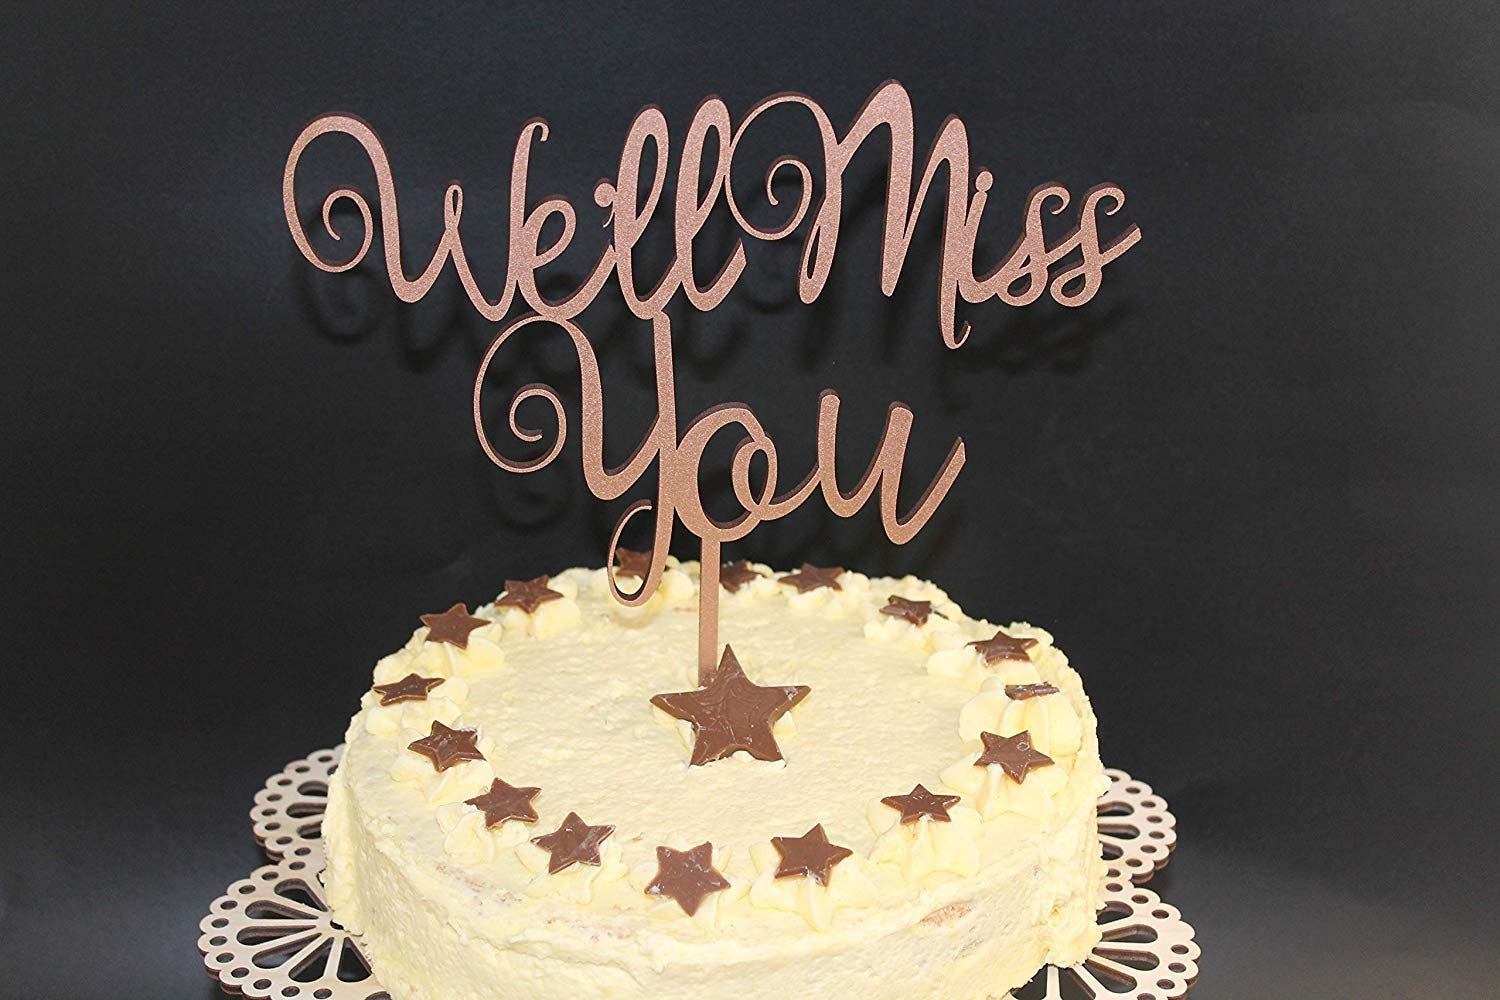 We'll Miss You Cake Topper Wood Custom Personalised Name and is Age Solid Wood Luxury Premium Topper Keepsake Retirement Leaving Gift